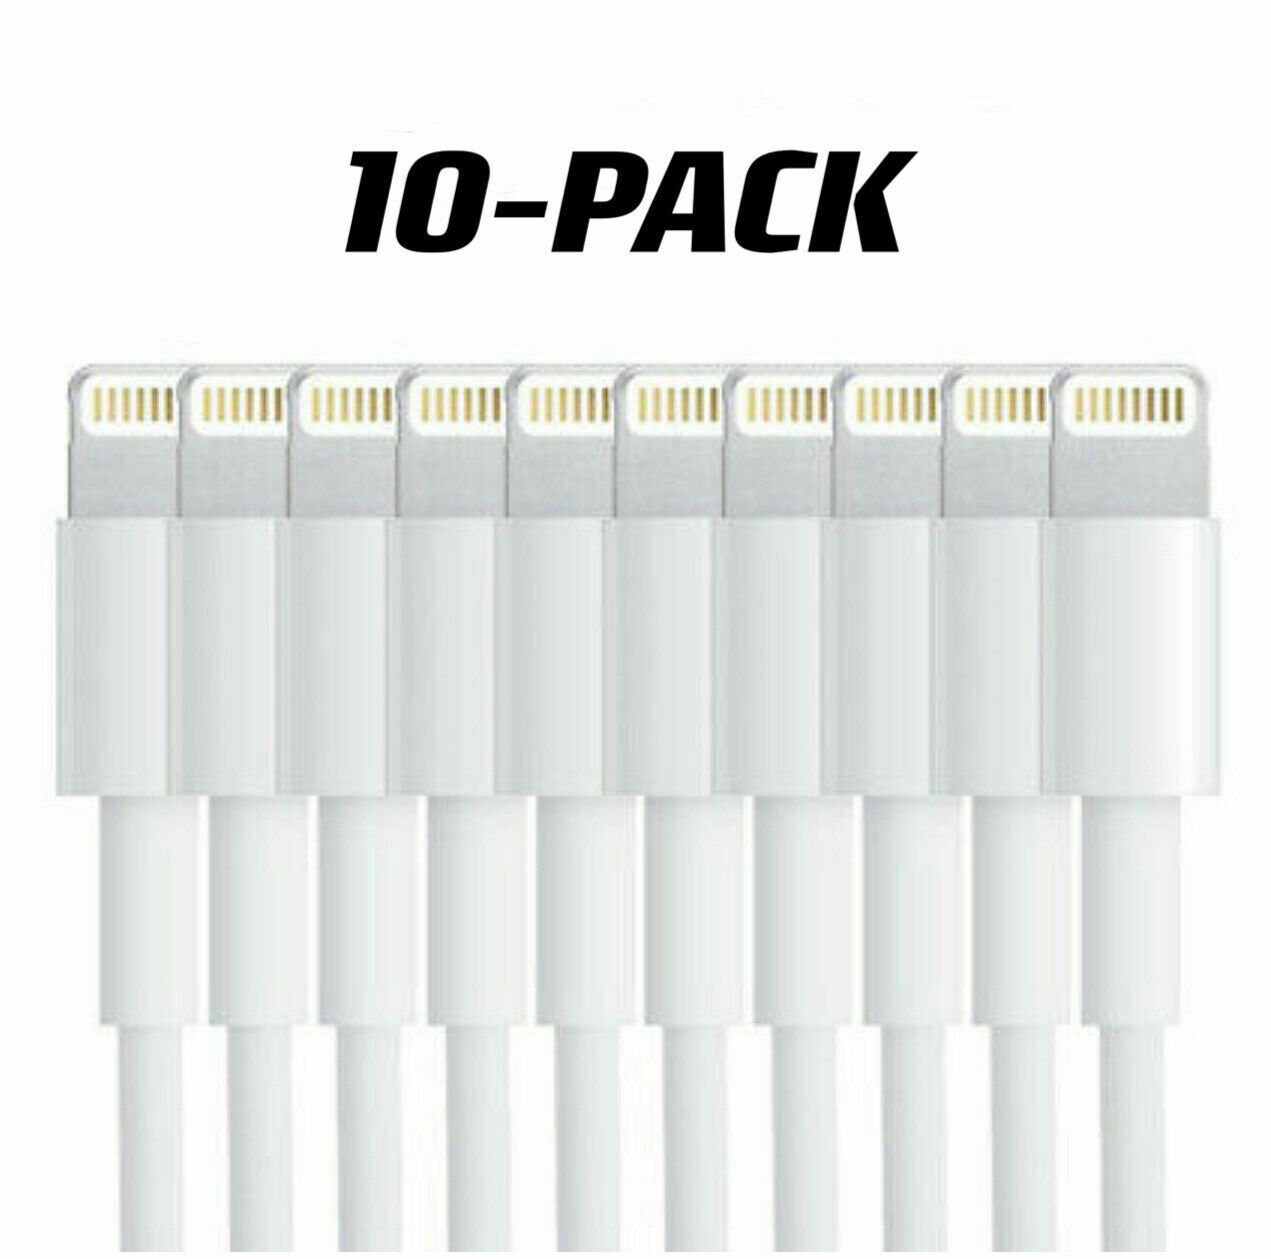 10-PACK 3FT USB Charger Cable Cord For iPhone 11 PRO XR X XS MAX 8 7 6 6S 5 PLUS Unbranded/Generic iPhone 11 PRO XR X XS MAX 8 7 6 6S 5 PLUS